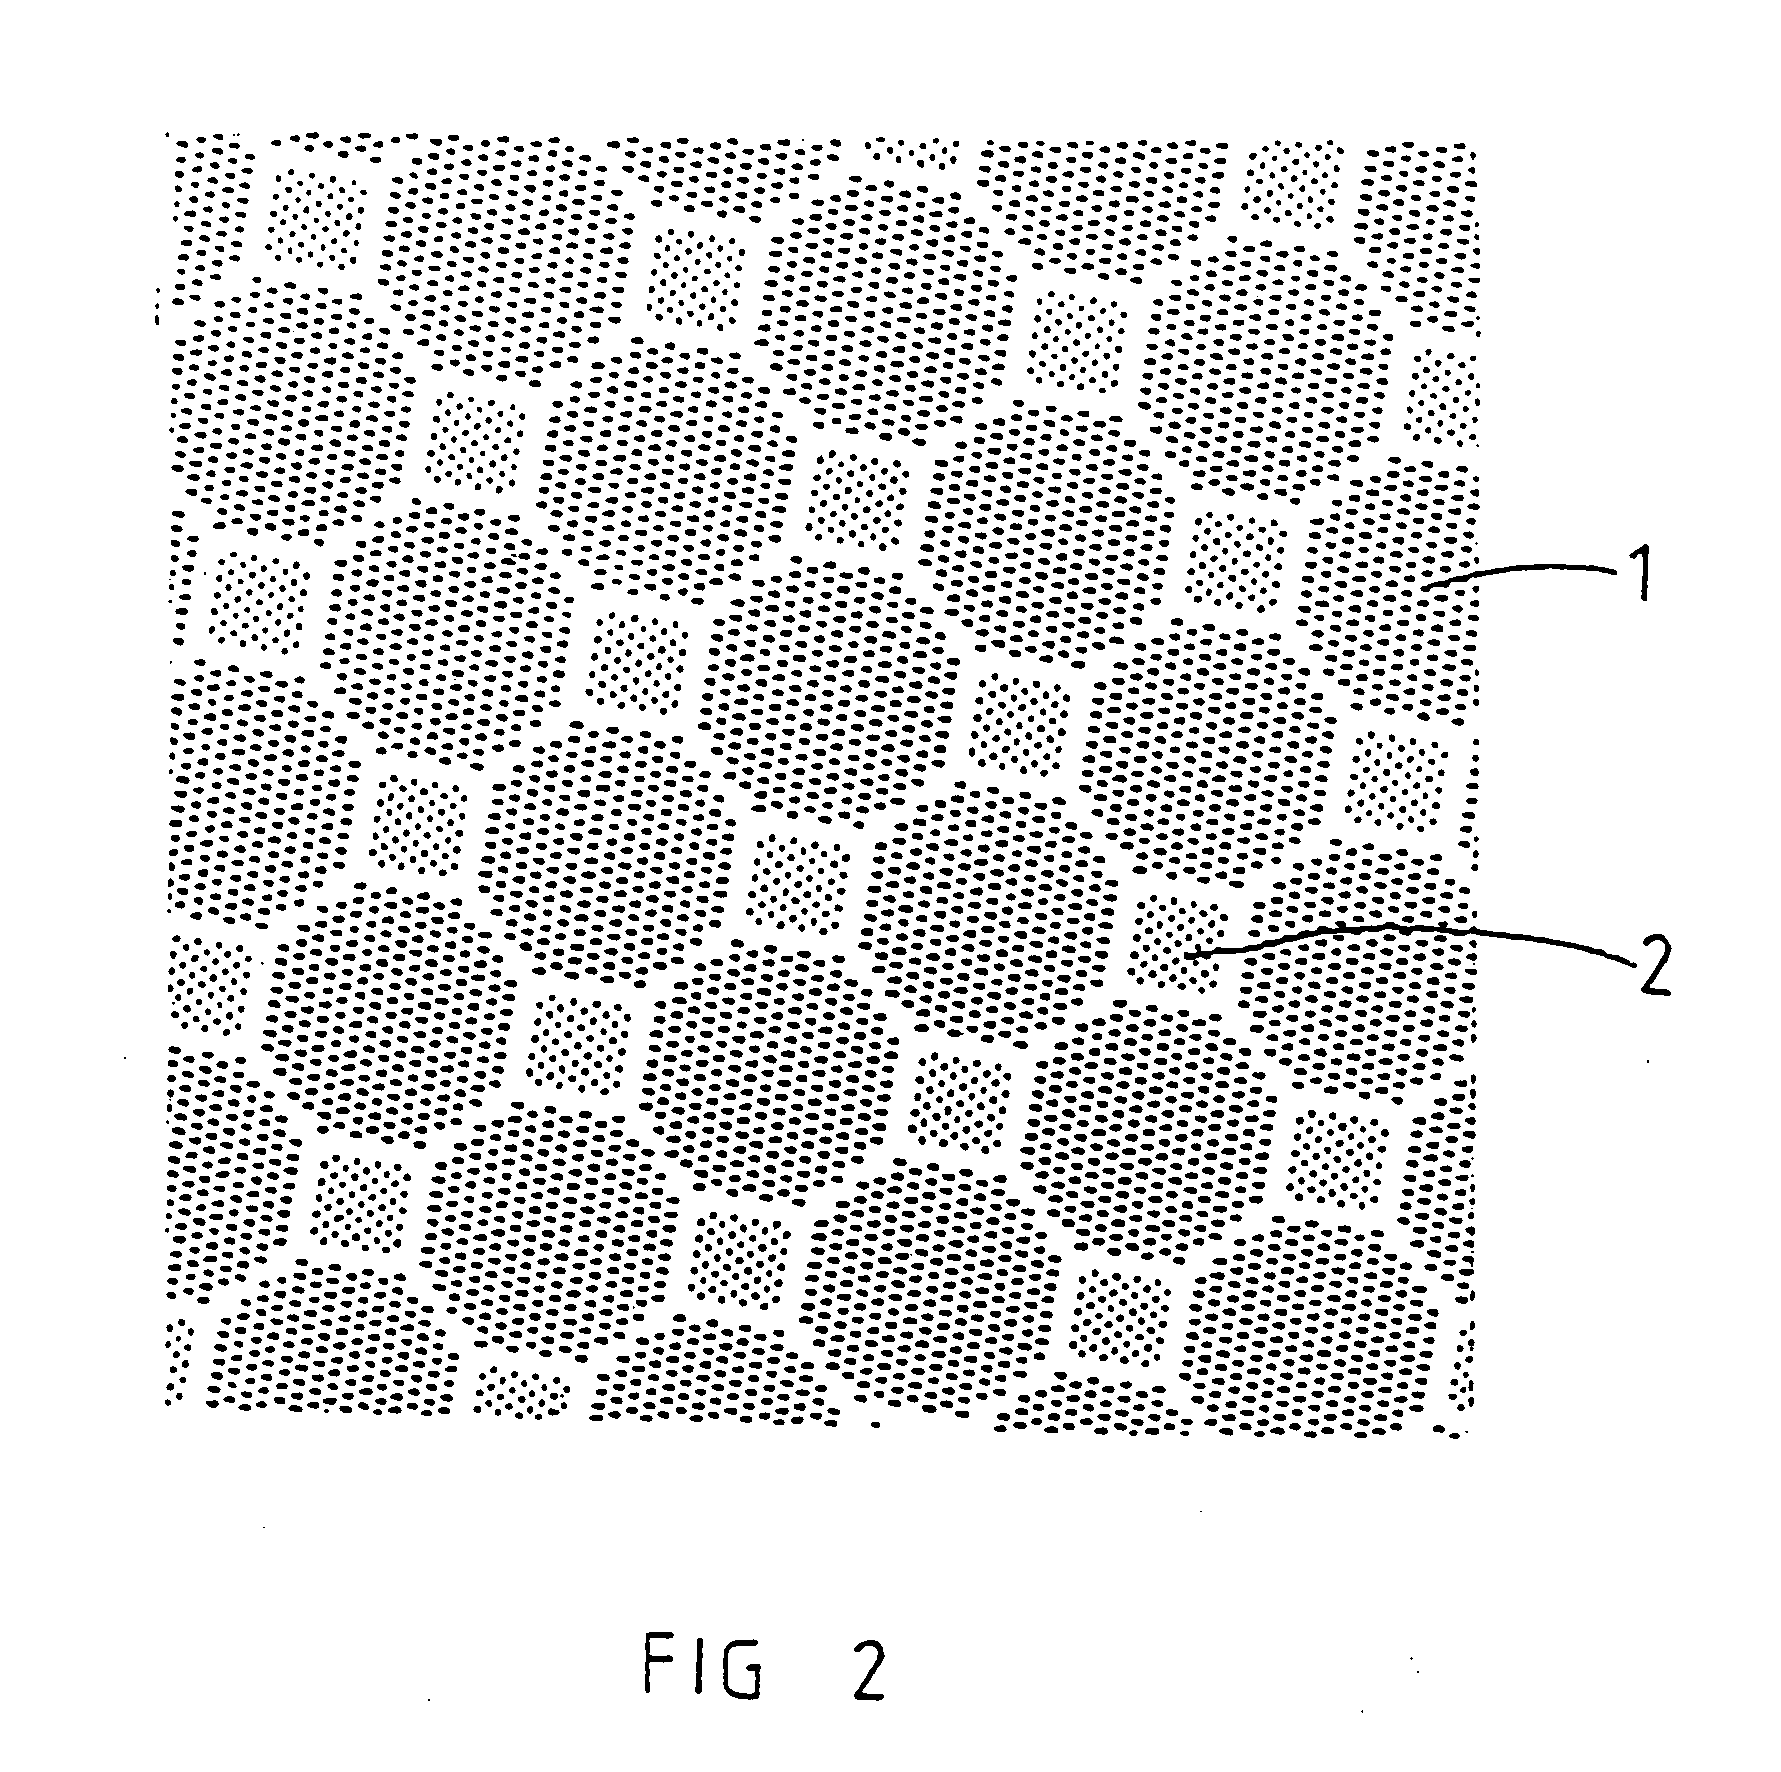 Absorbent paper product having improved embossing